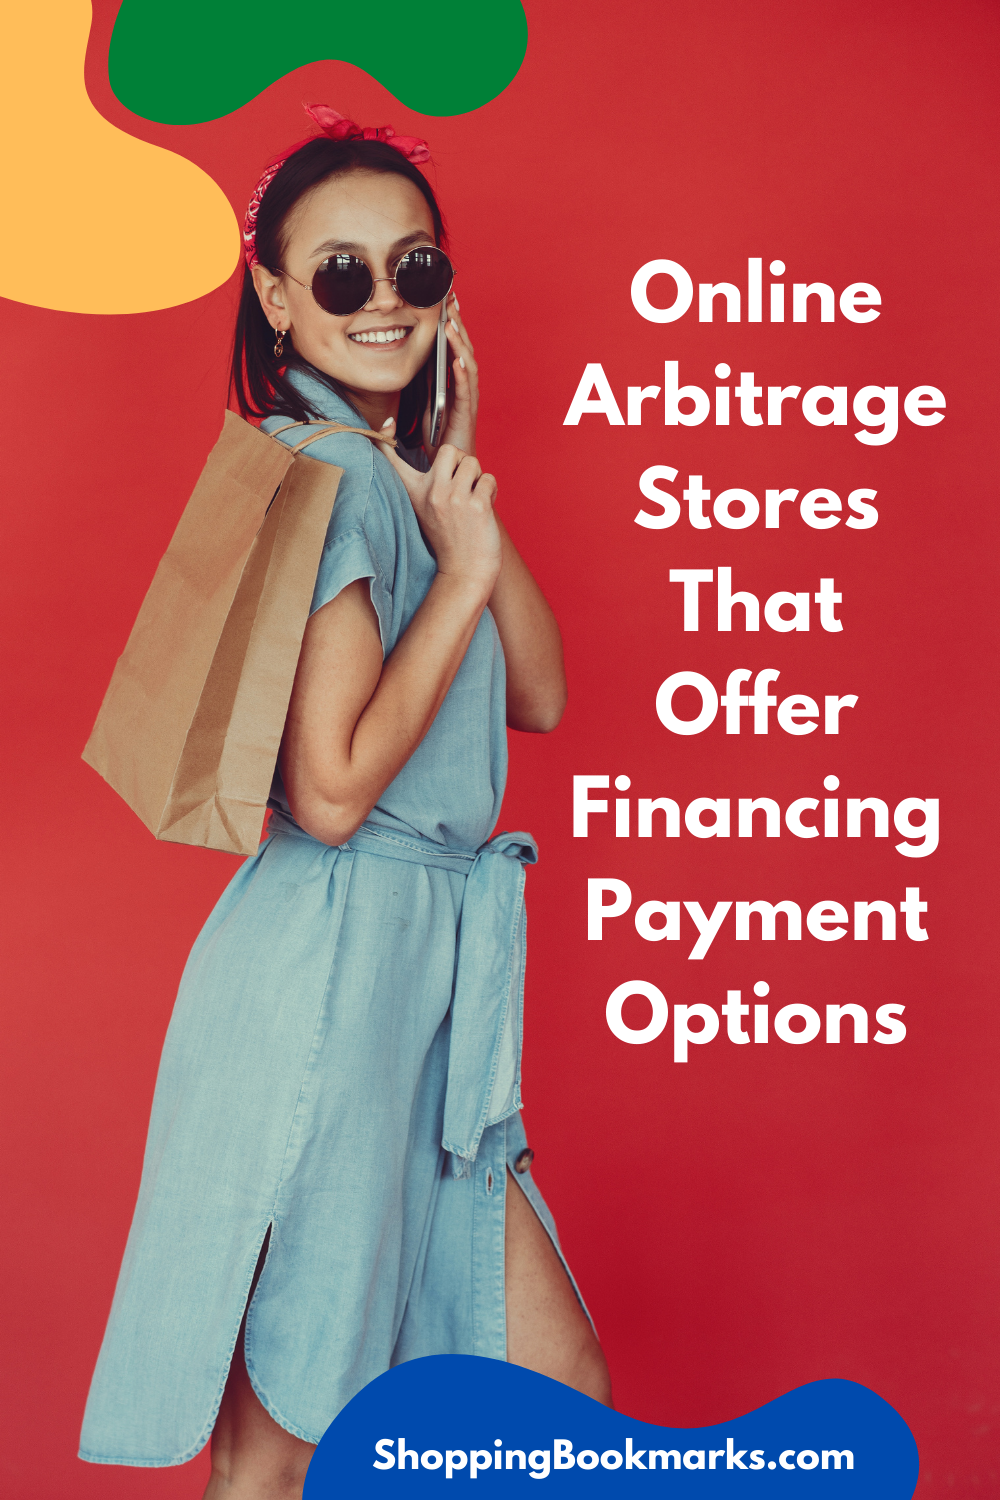 Online Arbitrage Stores That Offer Financing Payment Options